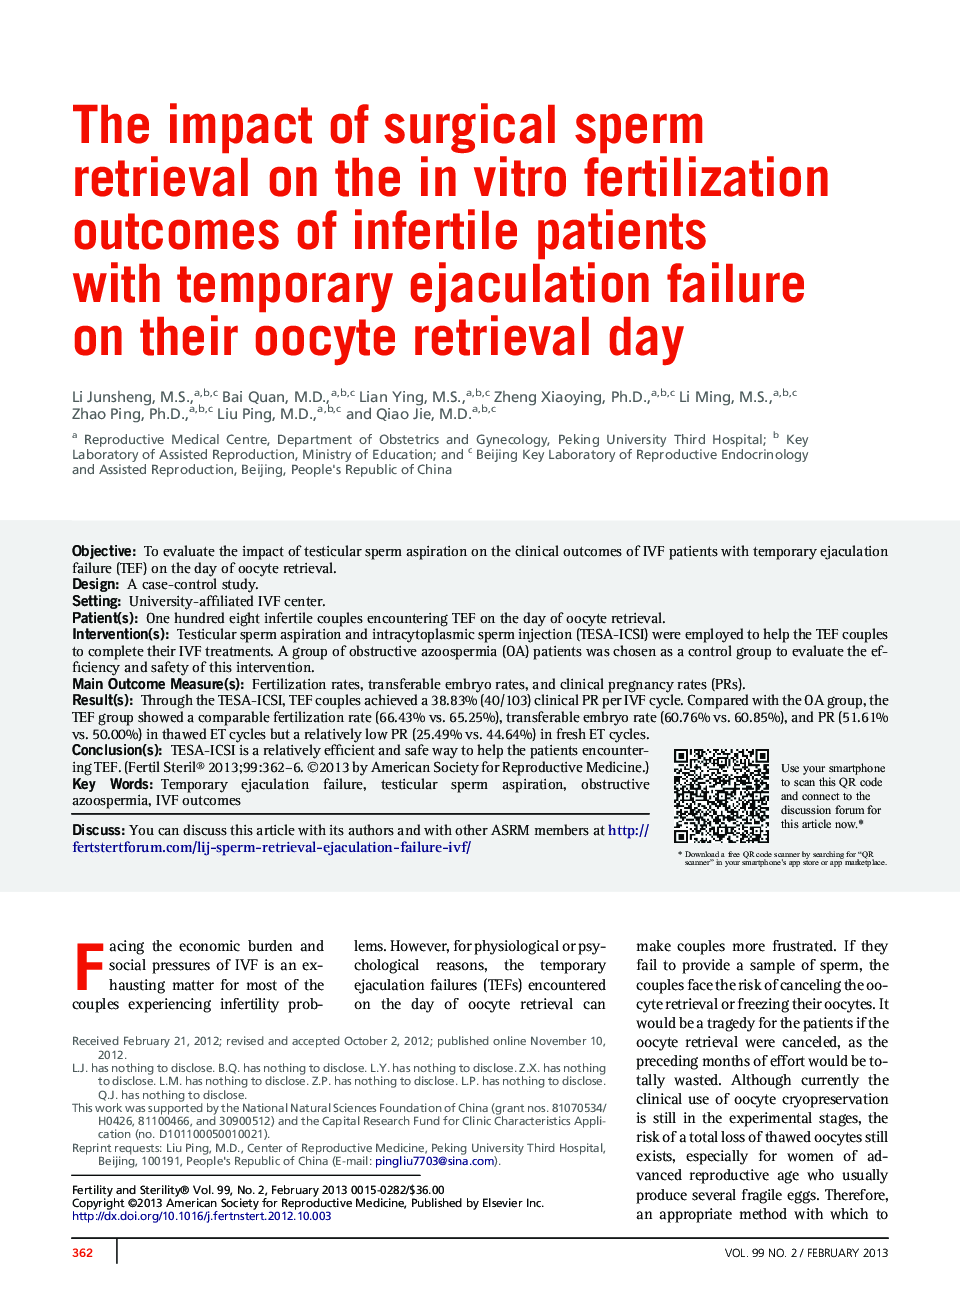 The impact of surgical sperm retrieval on the in vitro fertilization outcomes of infertile patients with temporary ejaculation failure on their oocyte retrieval day 